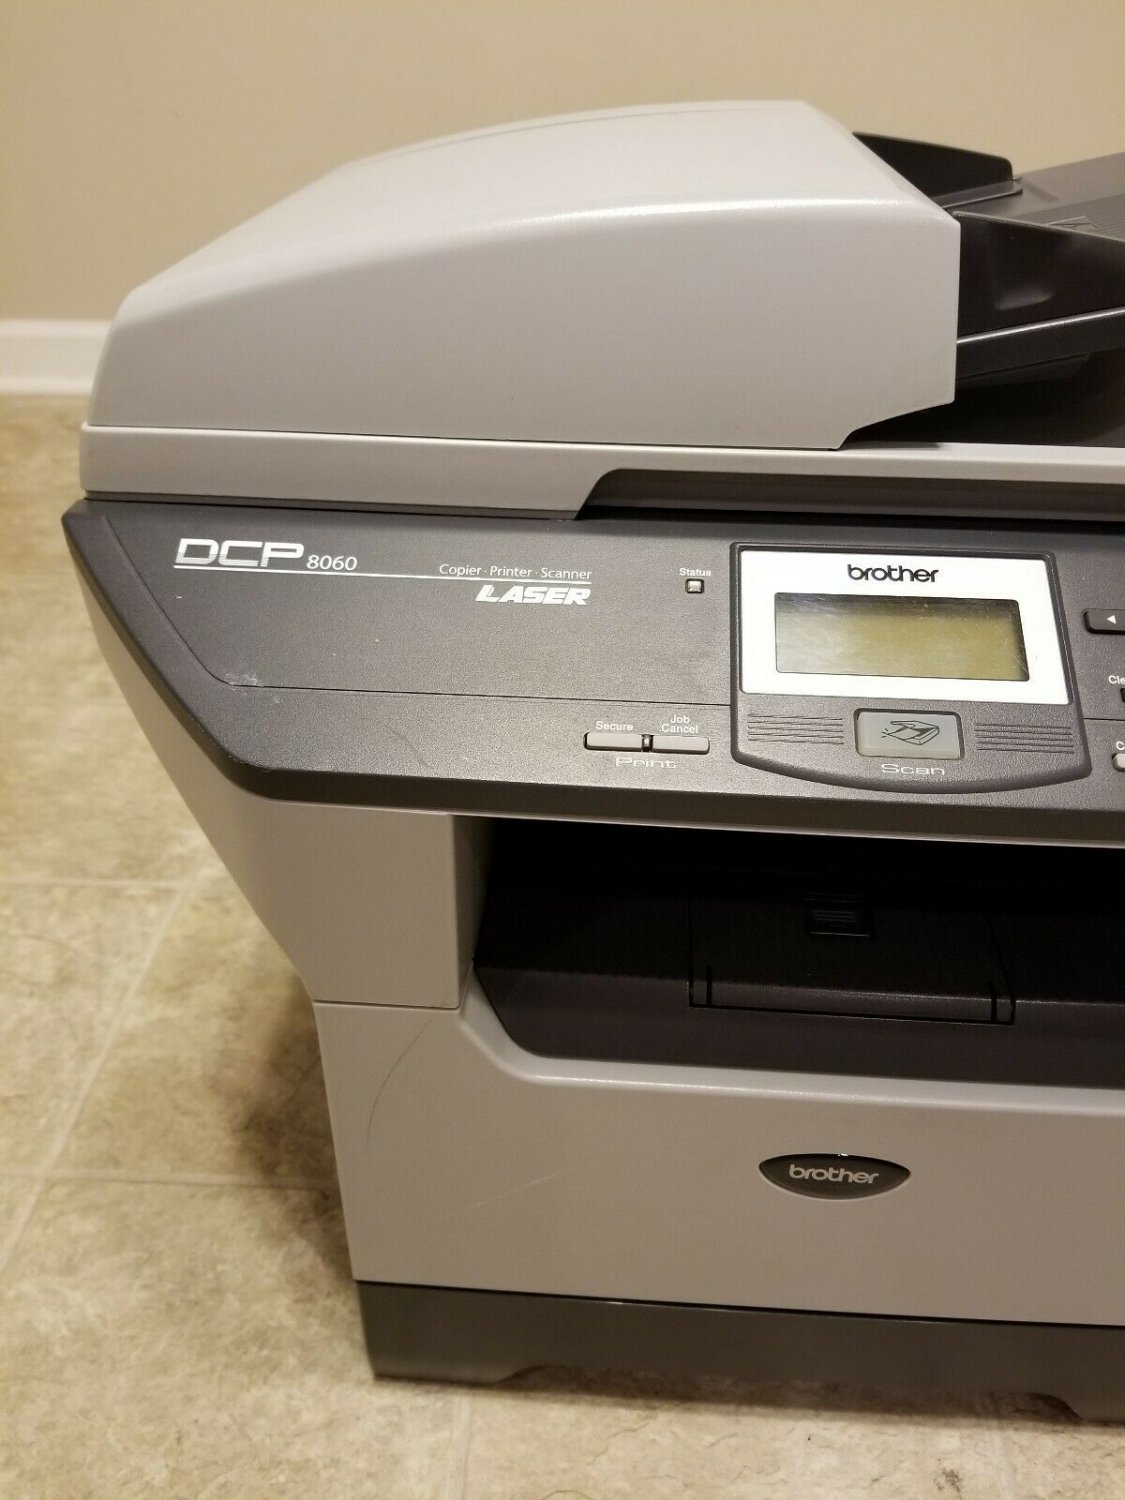 Brother Dcp 8060 All In One Laser Printer 2760